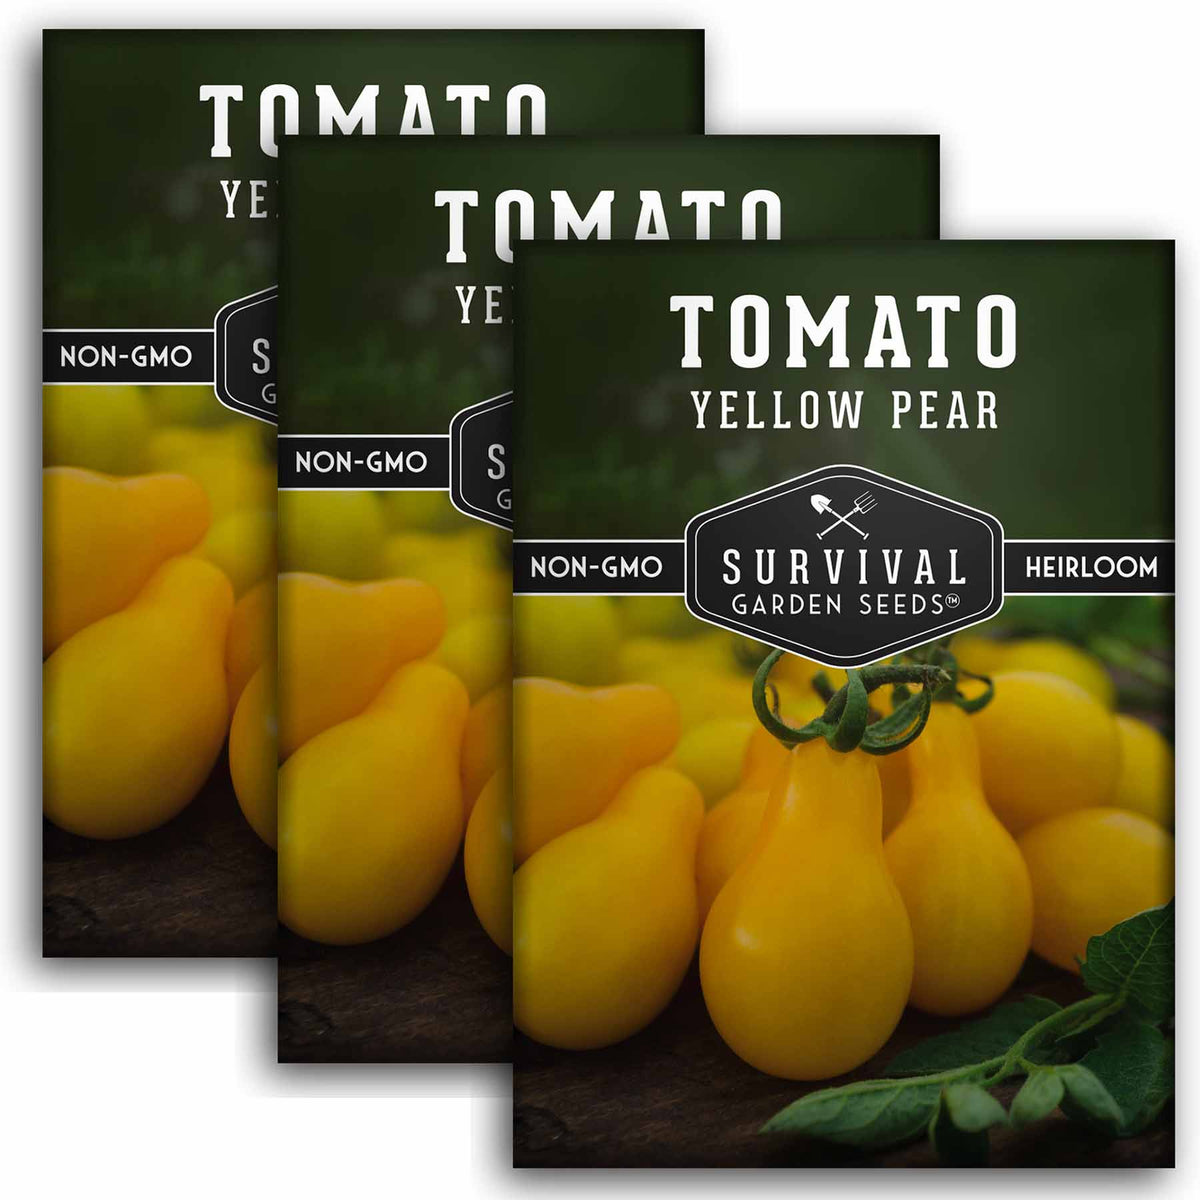 3 packets of Yellow Pear Tomato seeds